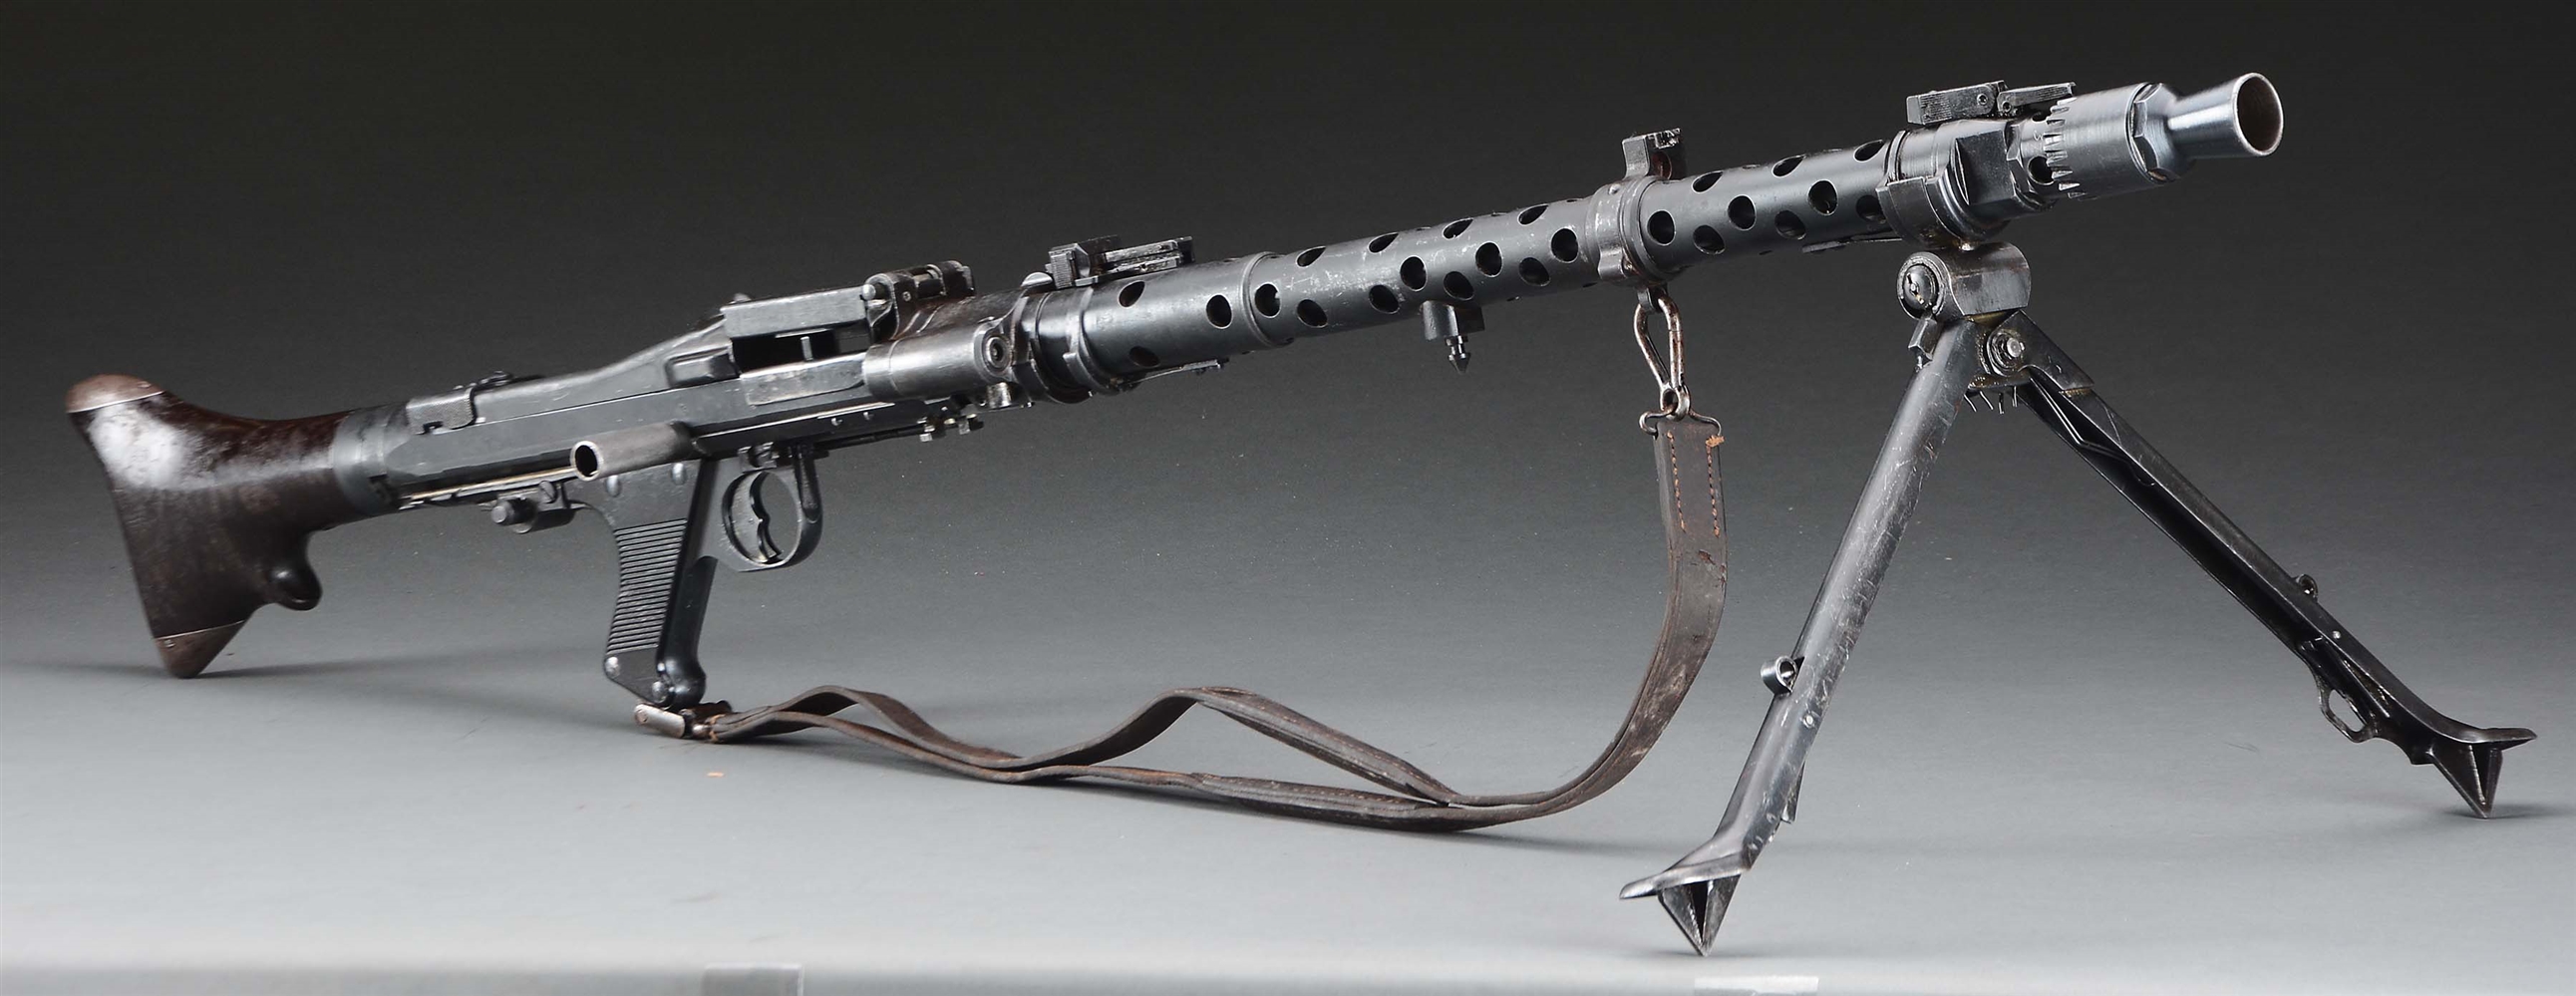 (N) EXTREMELY ATTRACTIVE AND NEAR MATCHING GERMAN WW2 MG-34 MACHINE GUN WITH RARE EARLY BUTT ASSEMBLY (CURIO & RELIC)